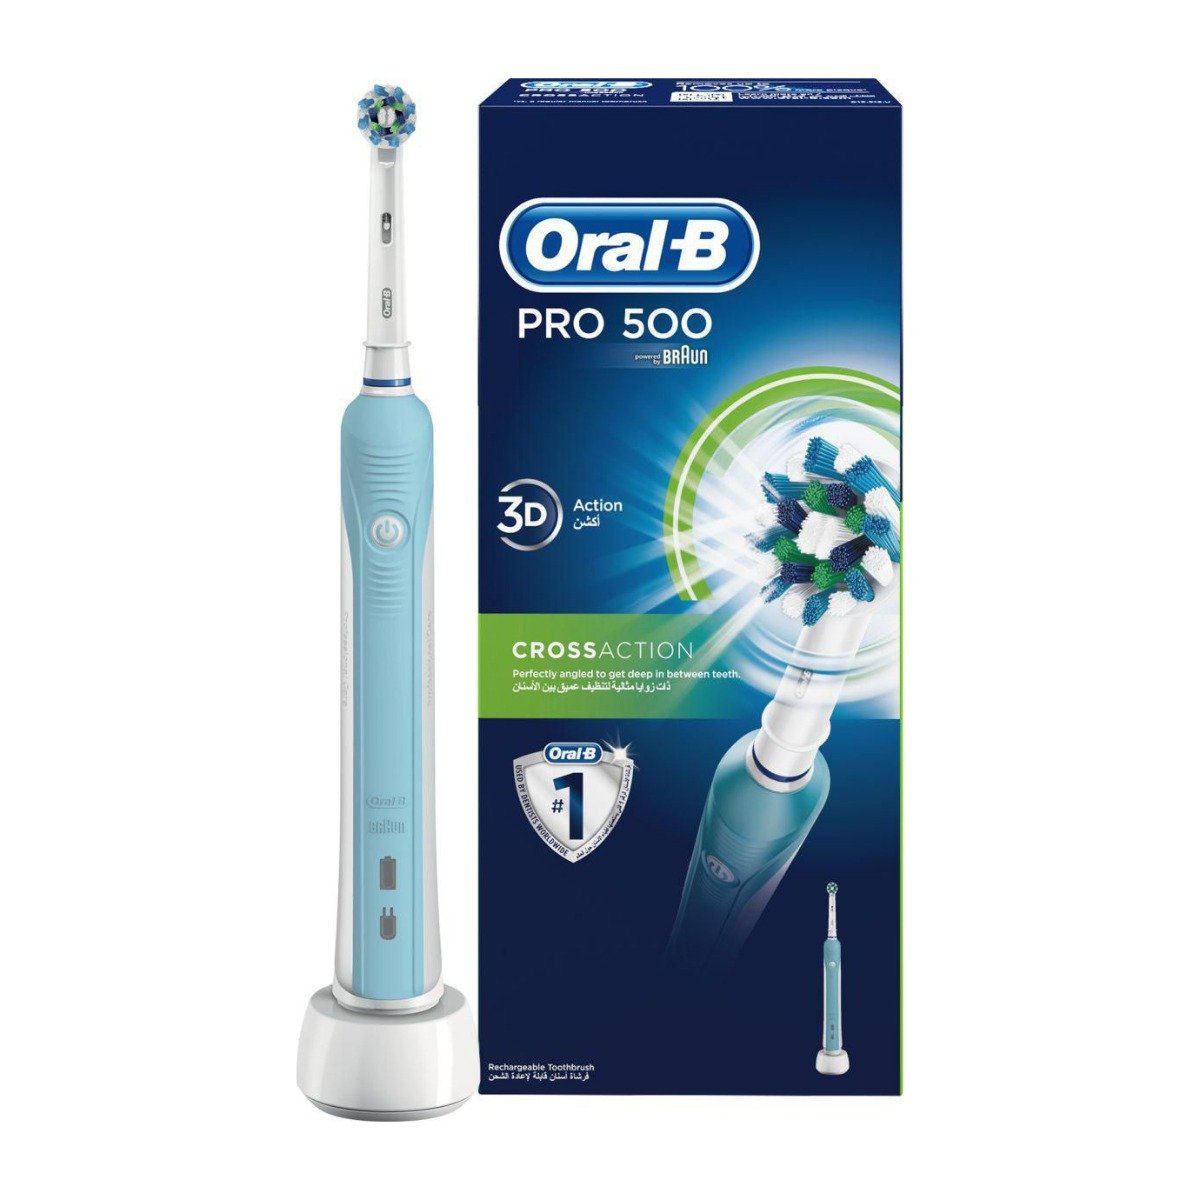 Oral-B Pro 500 Electric Toothbrush - Bloom Pharmacy